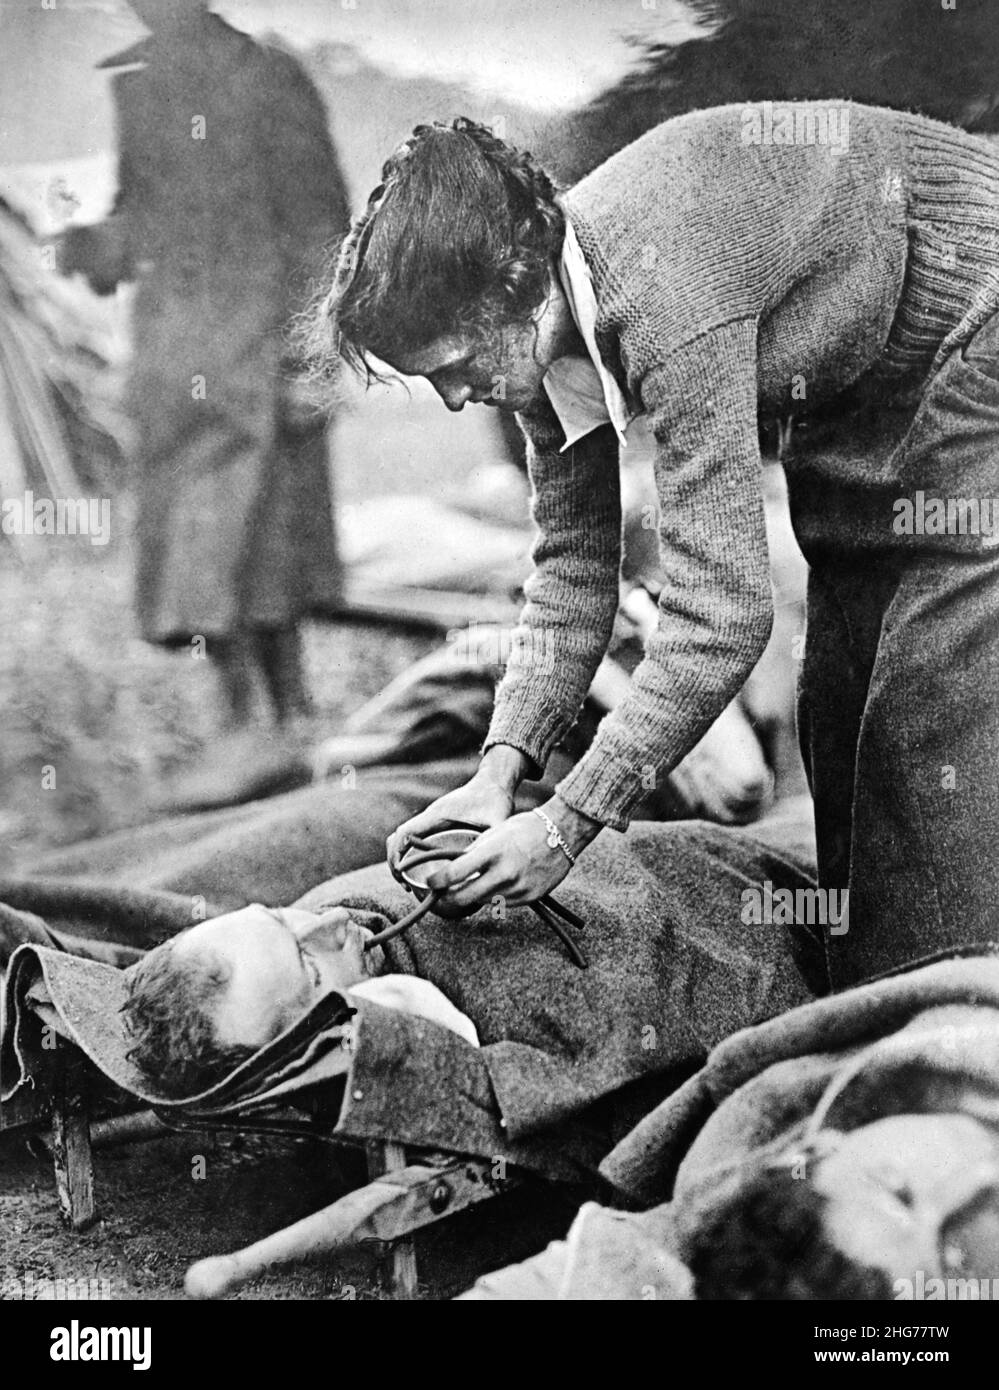 Miss Anna Rochester of Buffalo, New York, USA, feeding Sgt. W.B. Hyer, Co. M, 166th Infantry, 42nd Division, through tube at American Red Cross Hospitals #6-7, Souilly, France, American National Red Cross Photograph Collection, October 14, 1918 Stock Photo